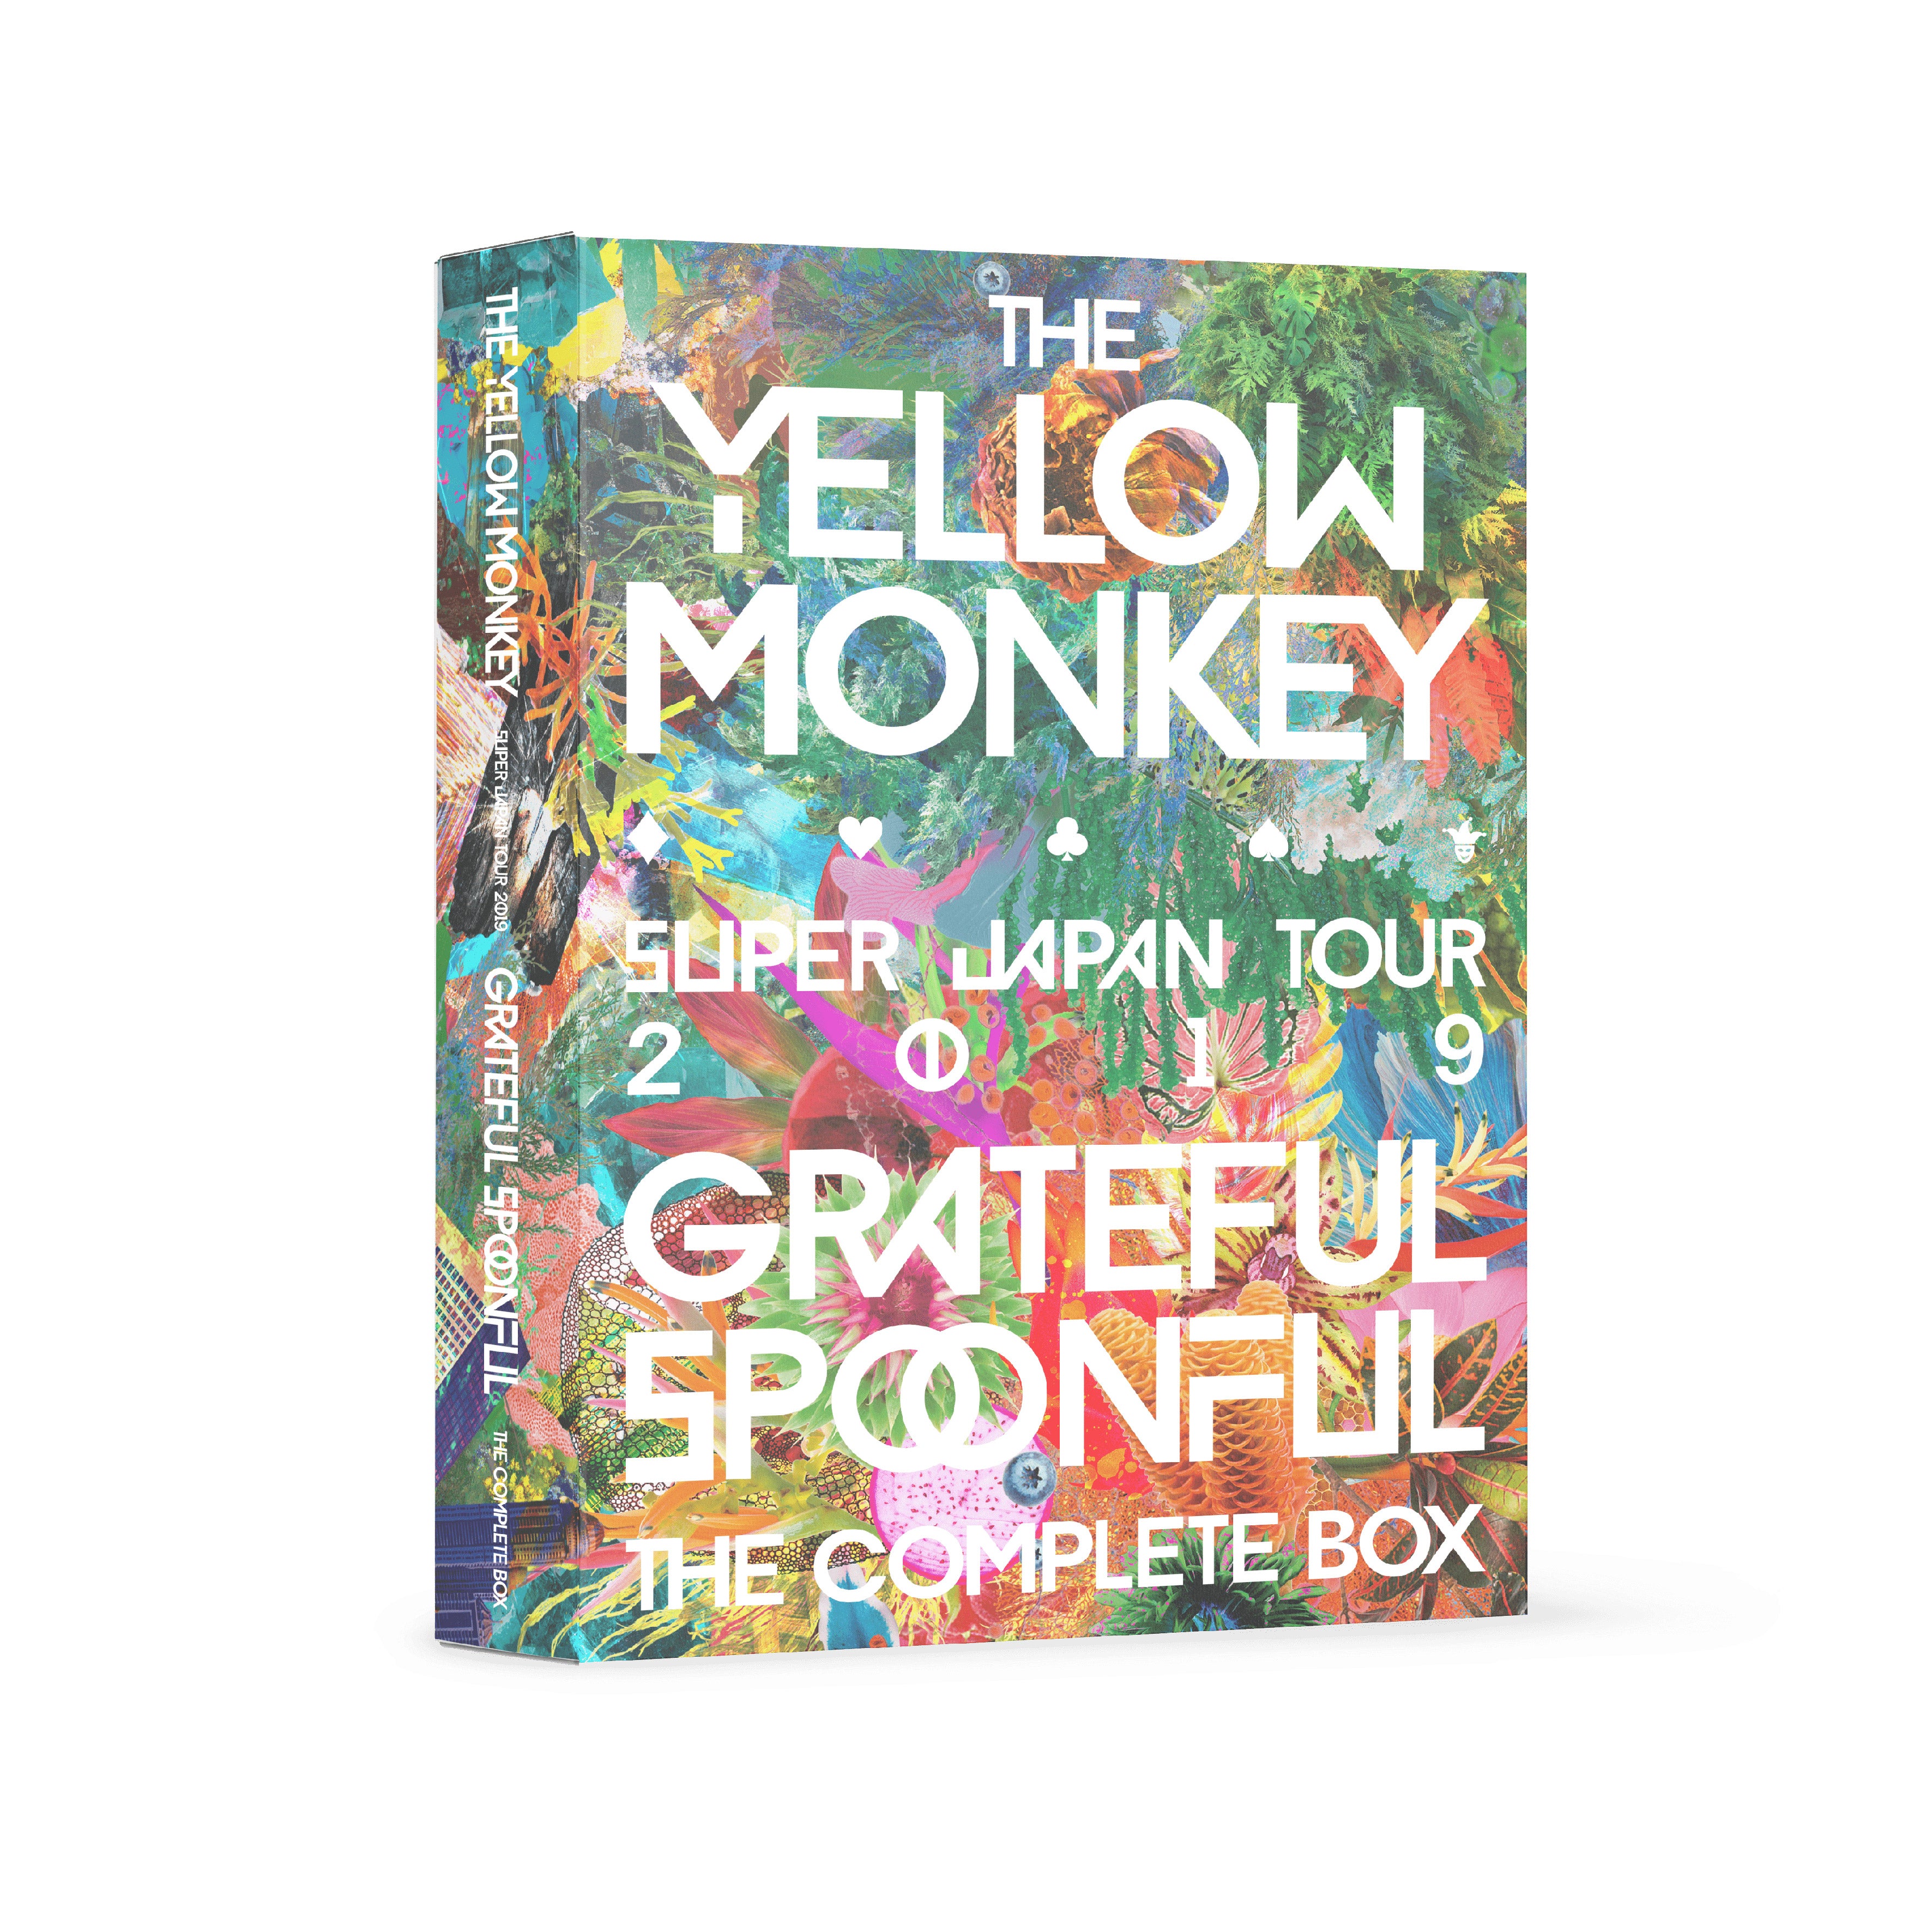 THE YELLOW MONKEY SUPER JAPAN TOUR 2019  -GRATEFUL SPOONFUL- Complete Box